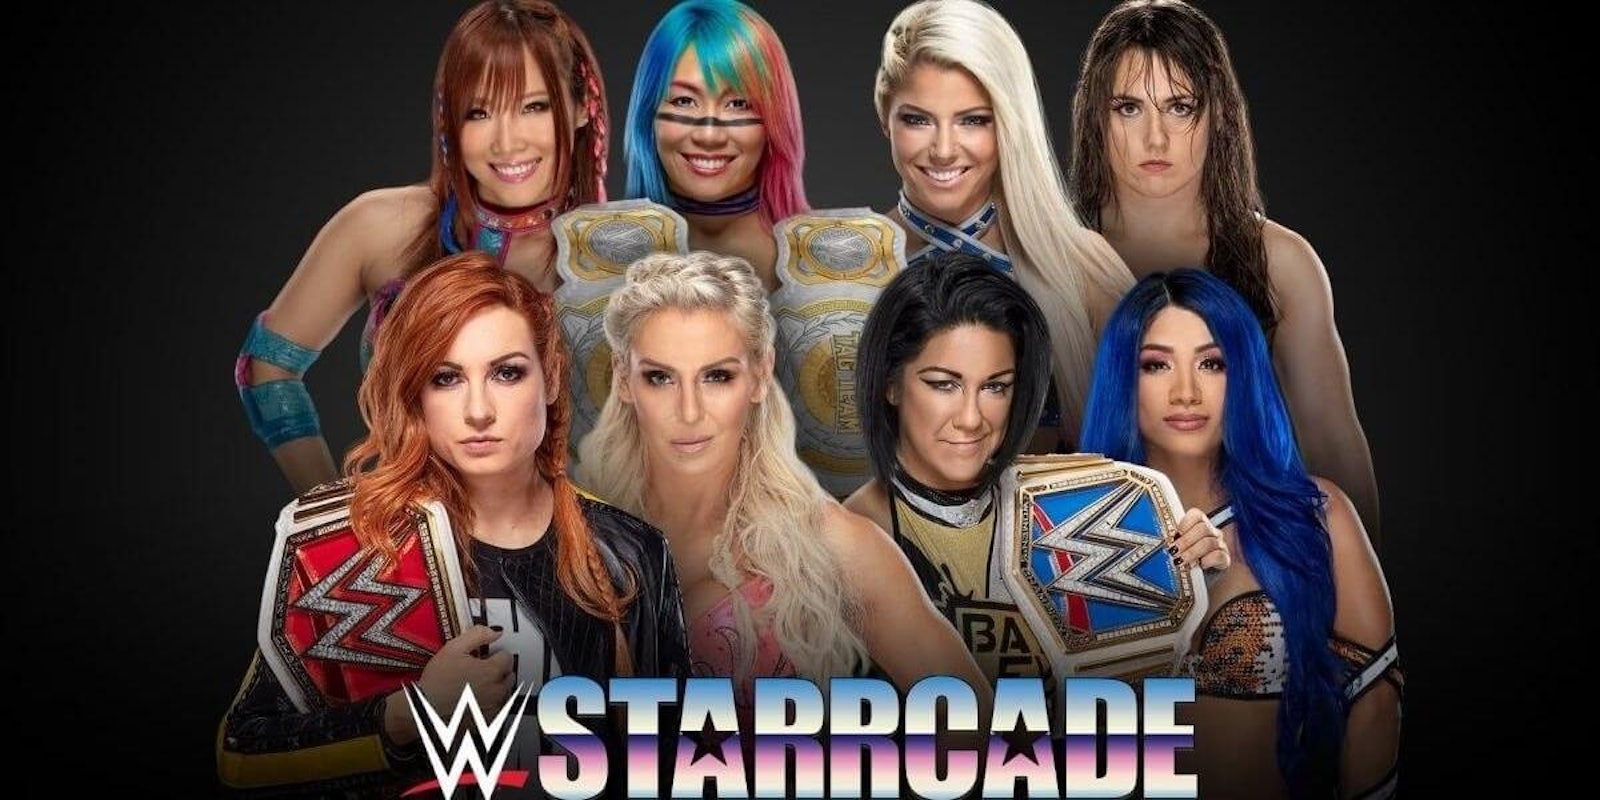 WWE Starrcade stream without cable